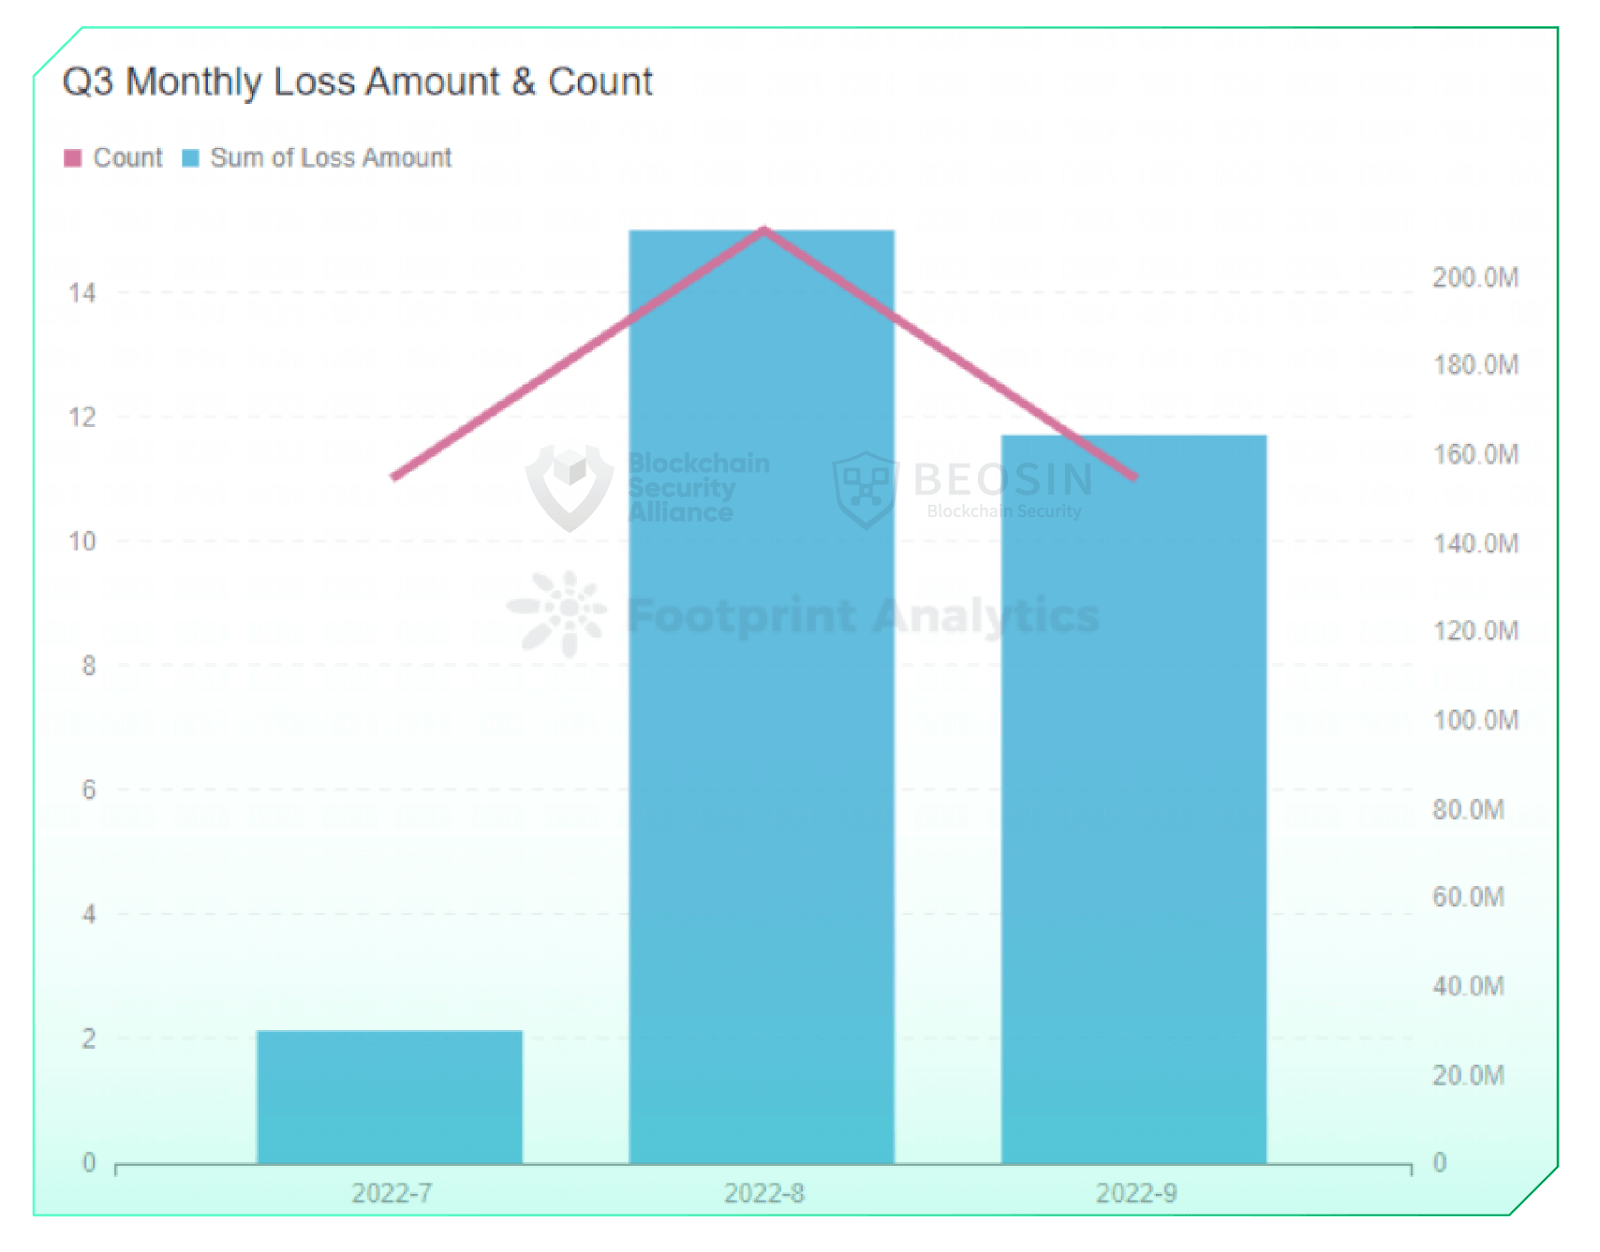 Q3 monthly loss amount & count